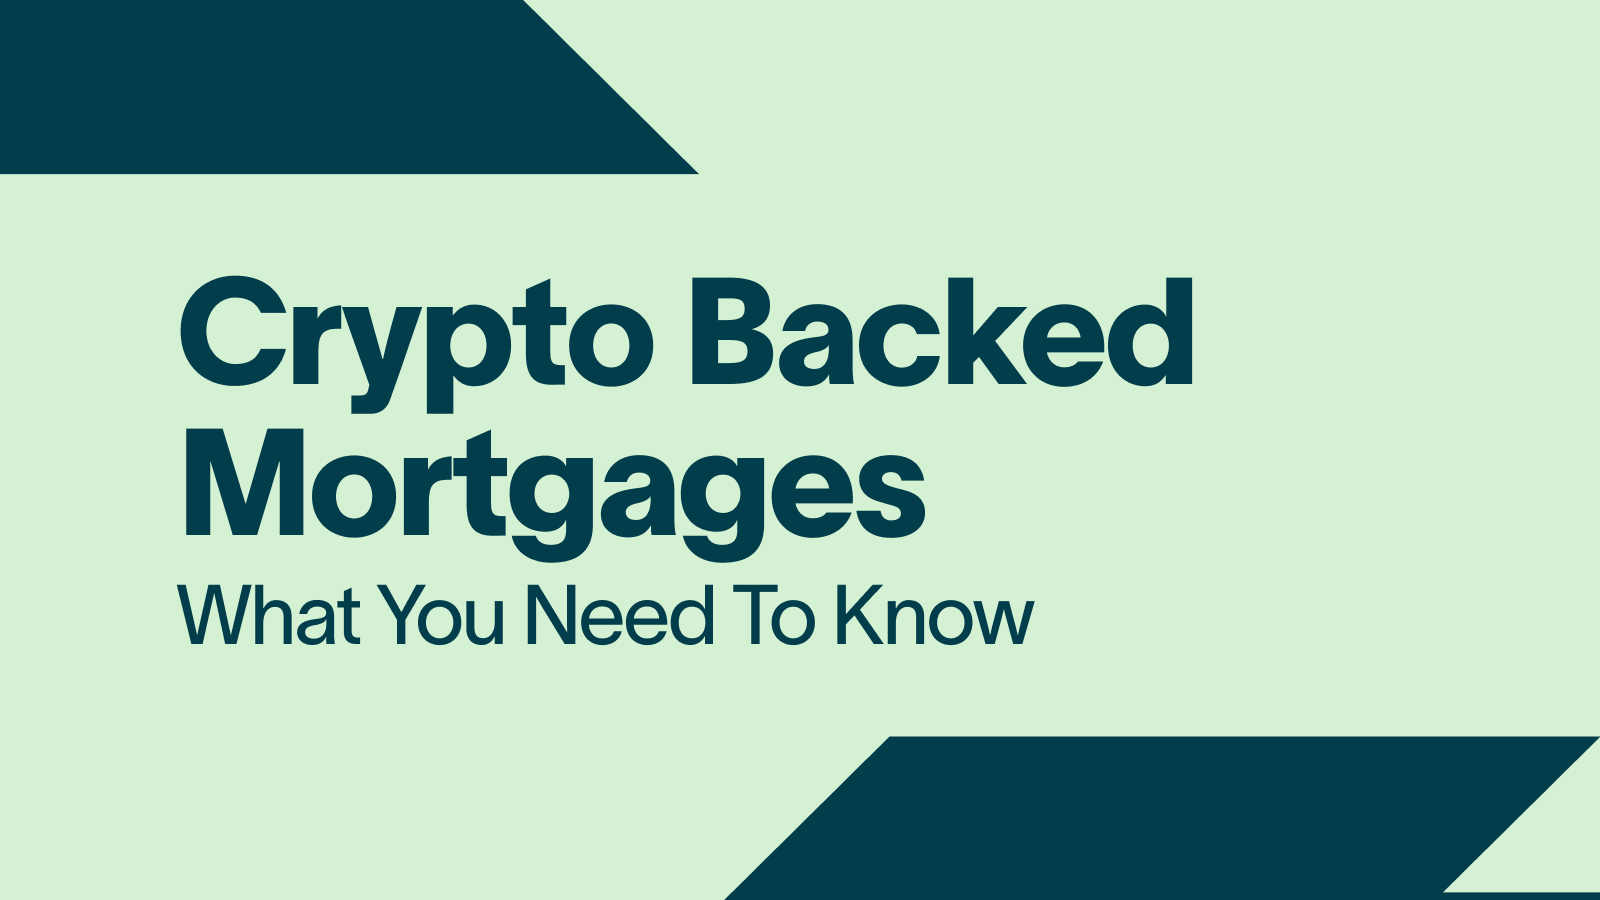 Crypto Backed Mortgages - What You Need To Know